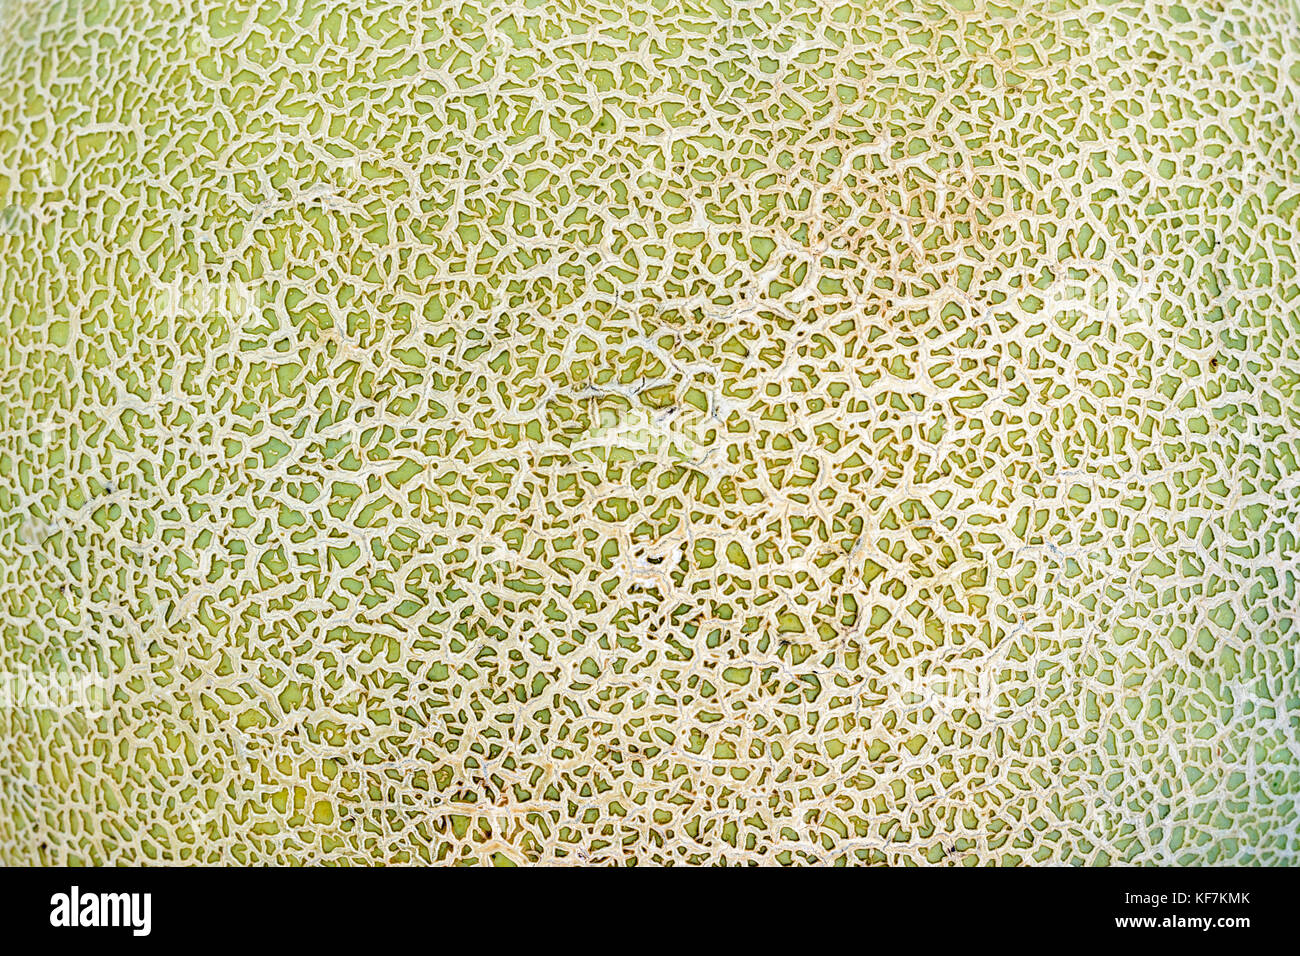 Closeup view of musk melon skin texture as abstract background Stock Photo